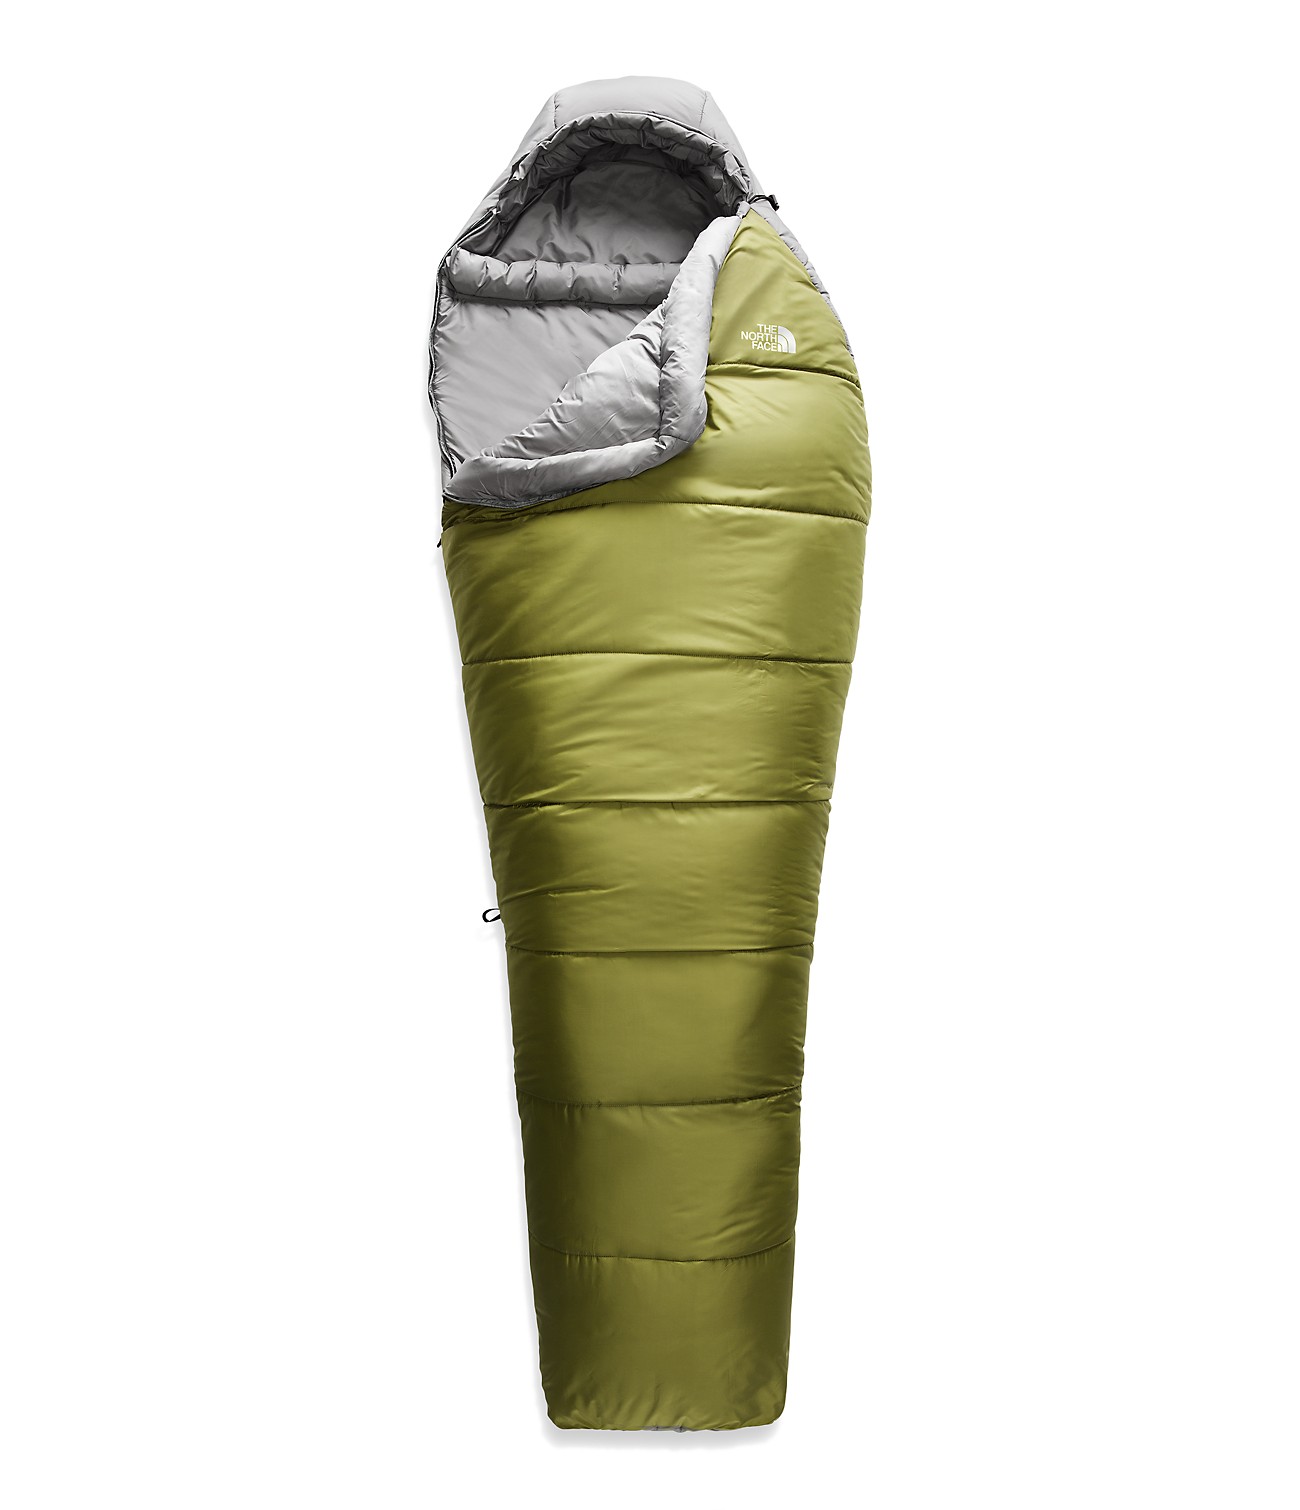 Wasatch 0/-18 Sleeping Bag | The North Face